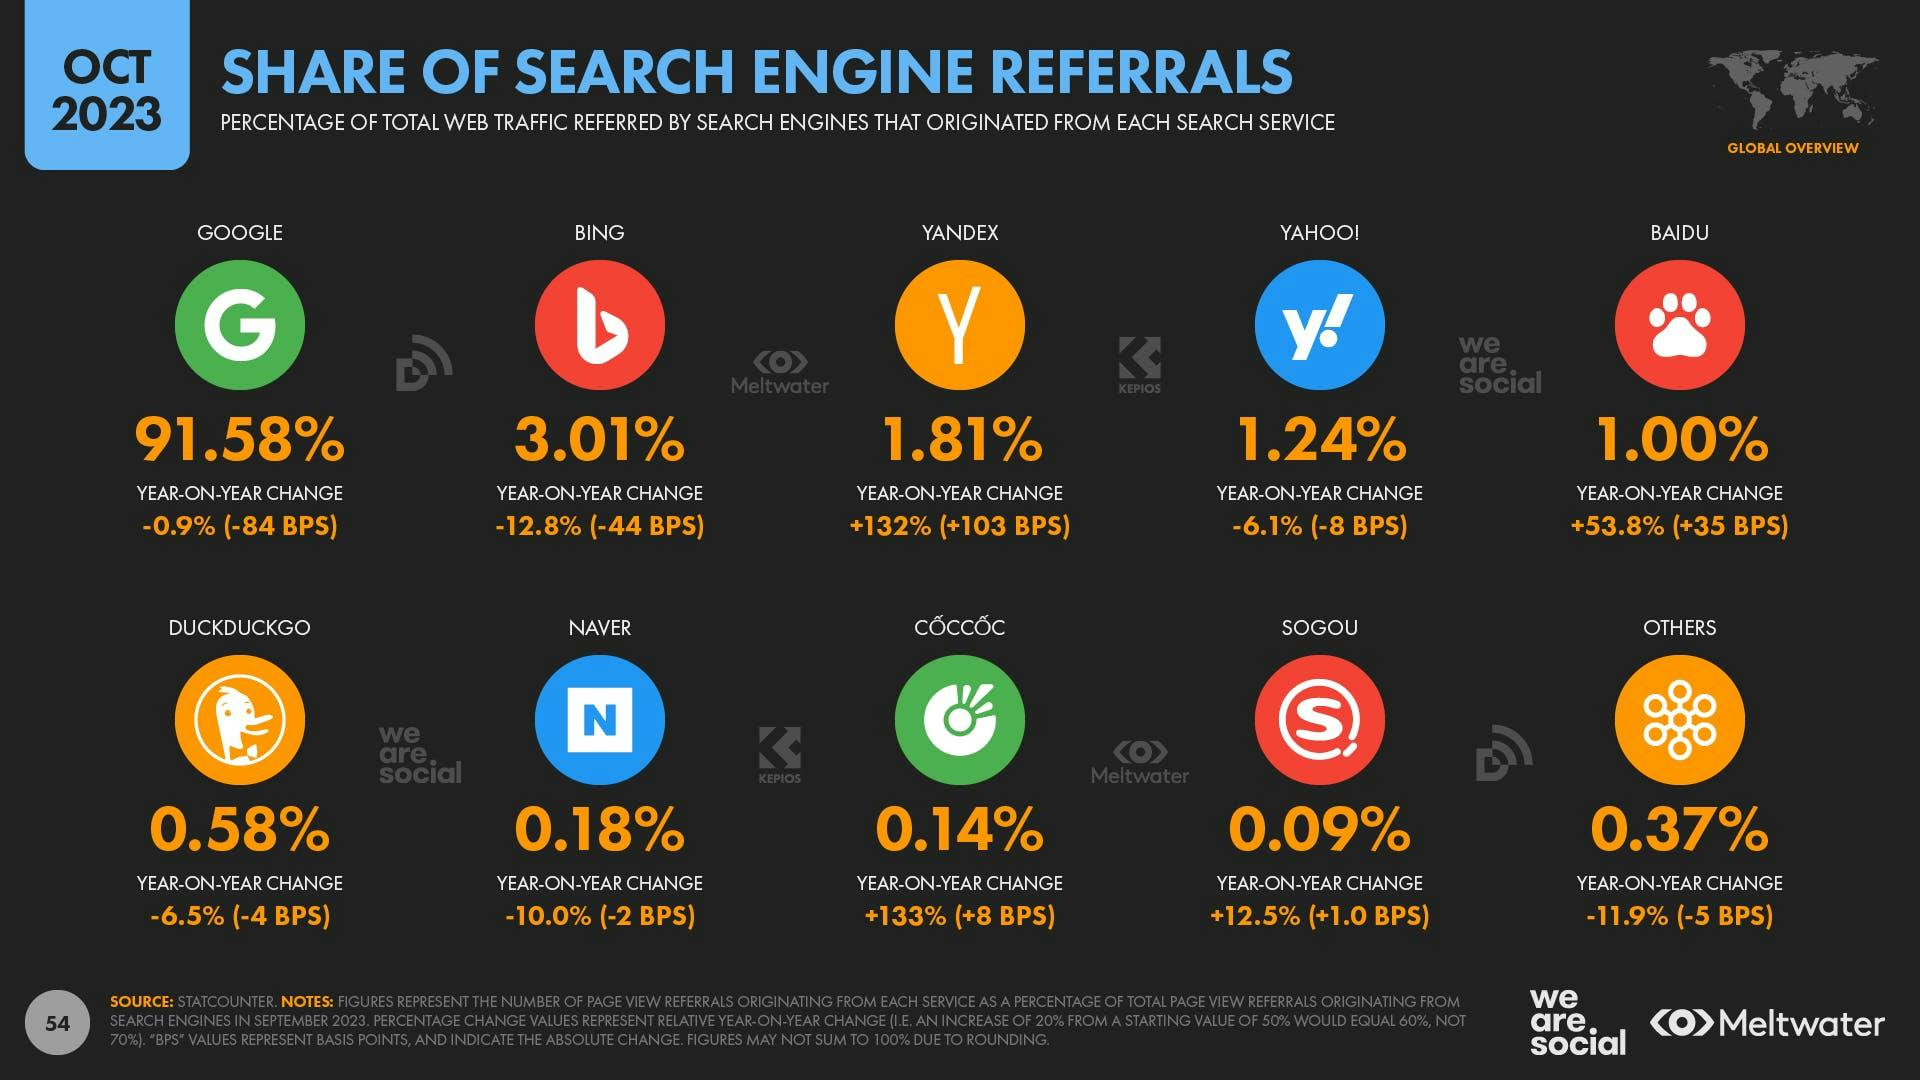 October 2023: Share of search engine referrals